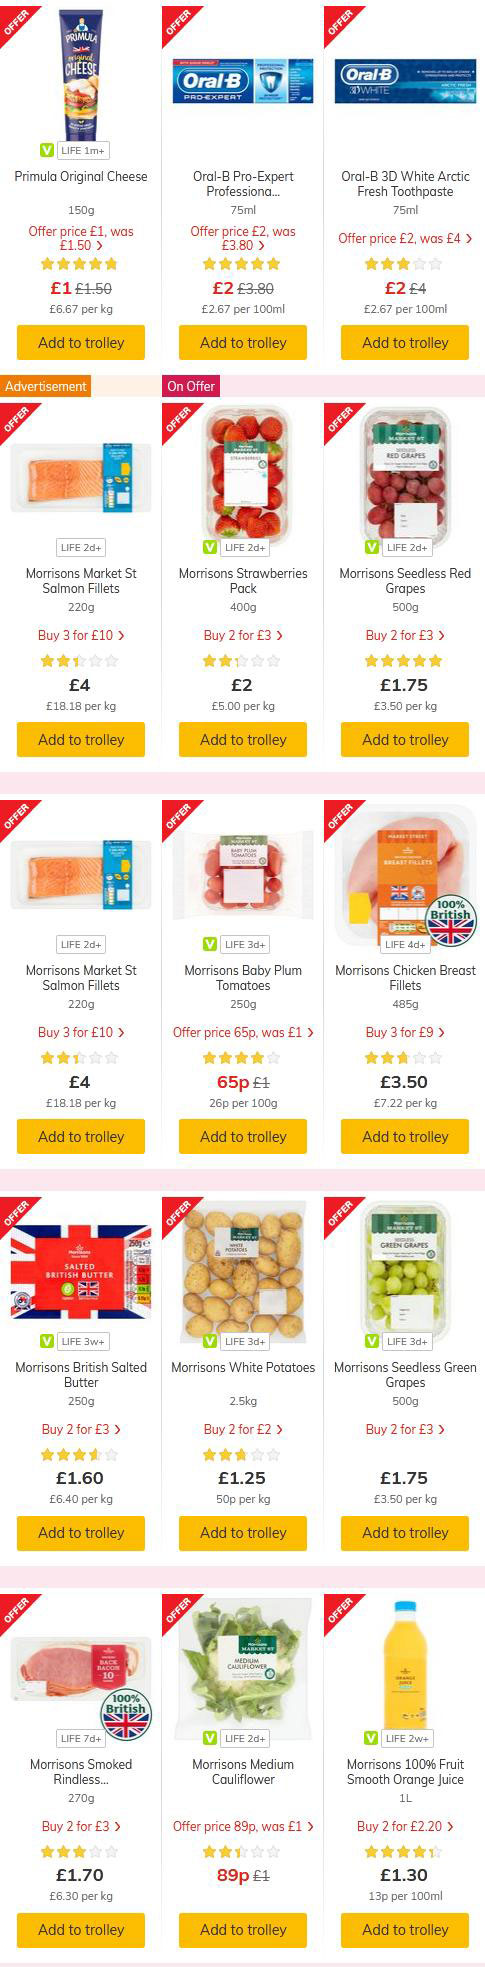 Morrisons offers (1) - 19 May 2020